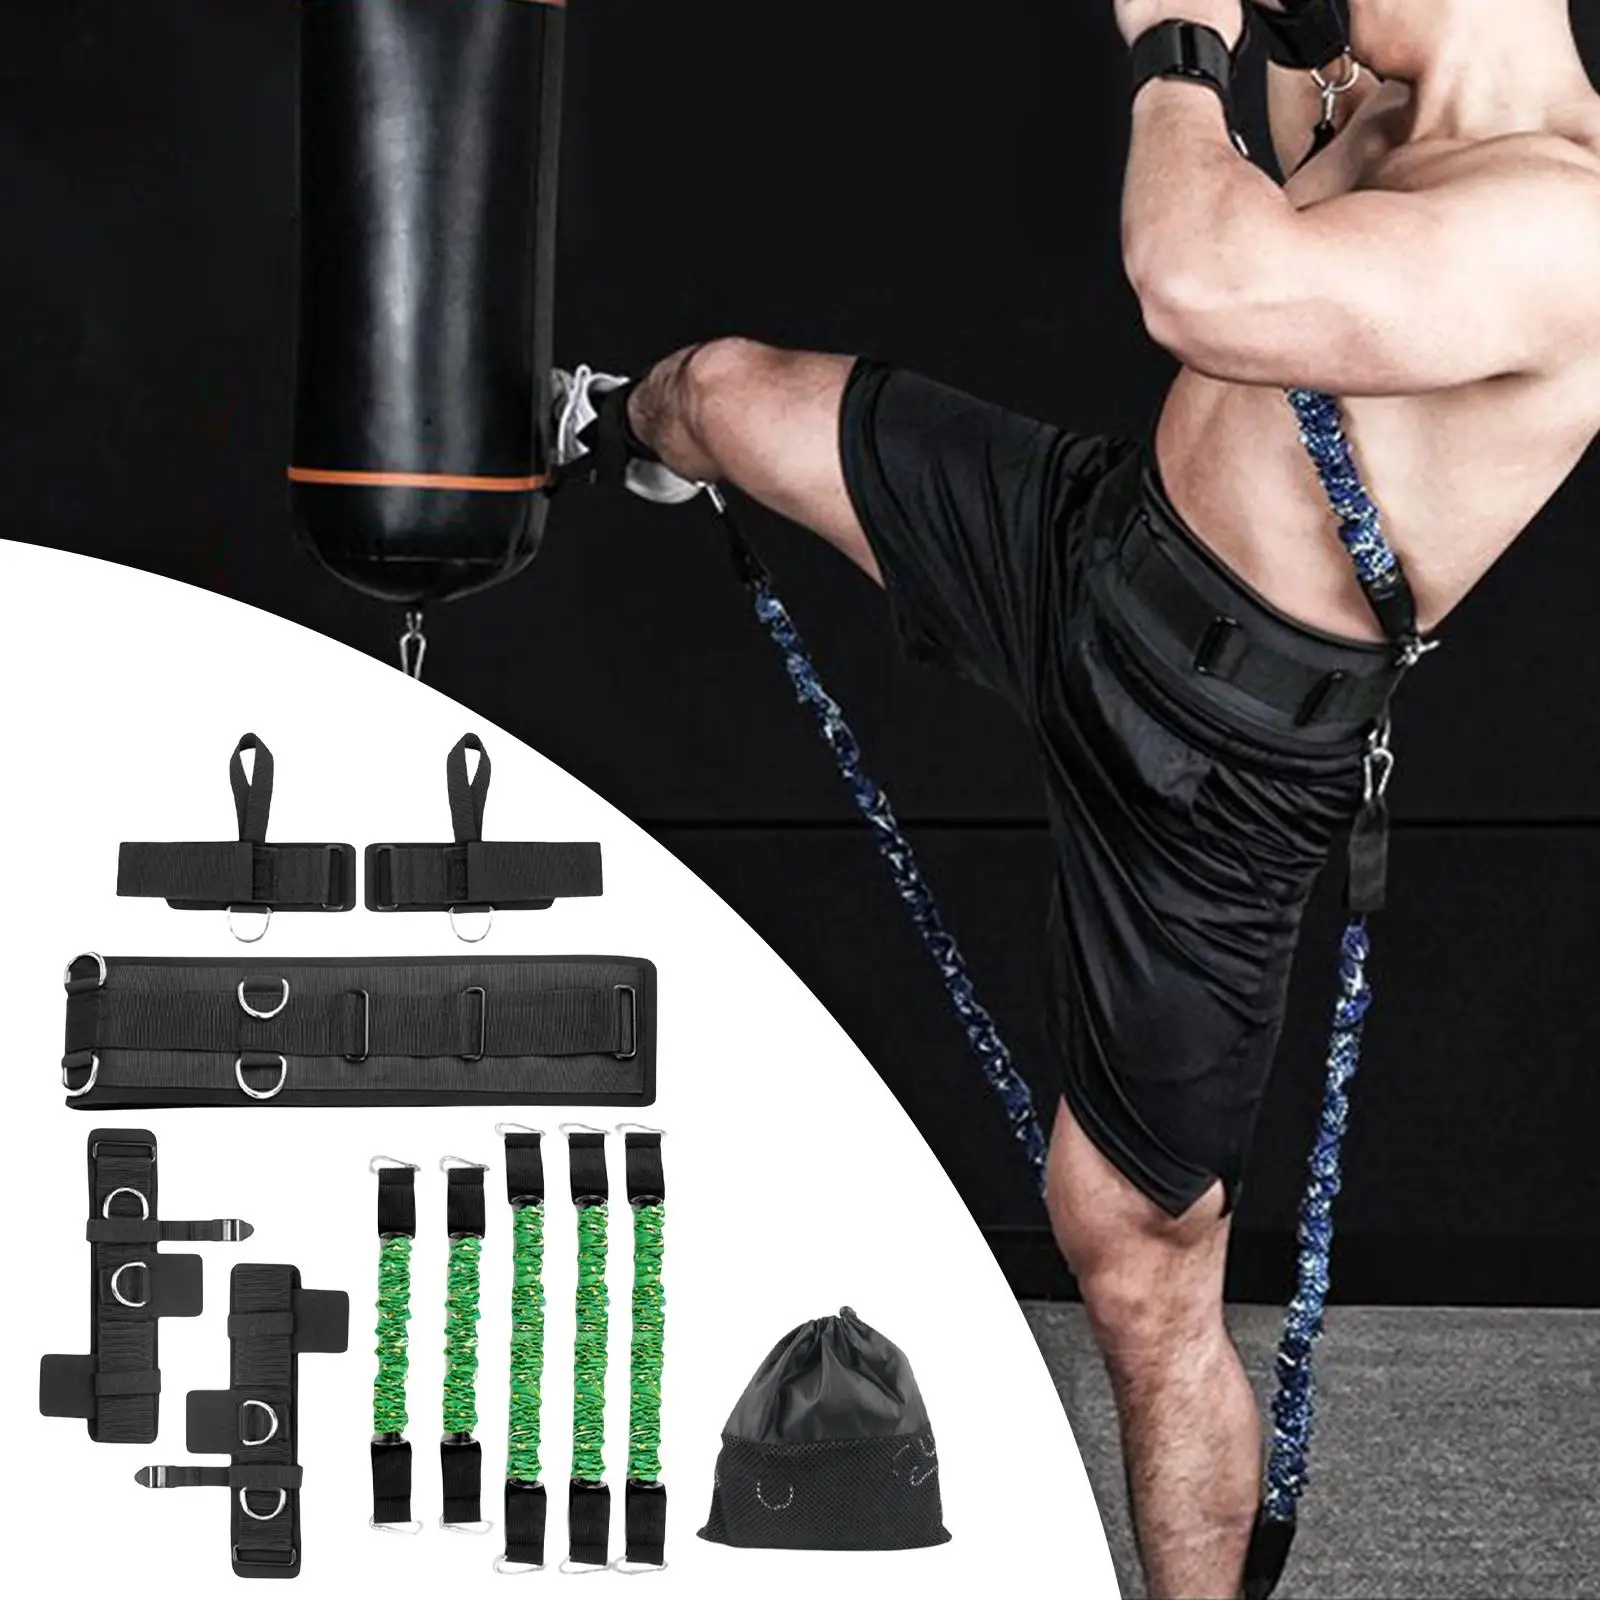 Boxing Resistance Training Exercise Band Kit for Track and Field Sports